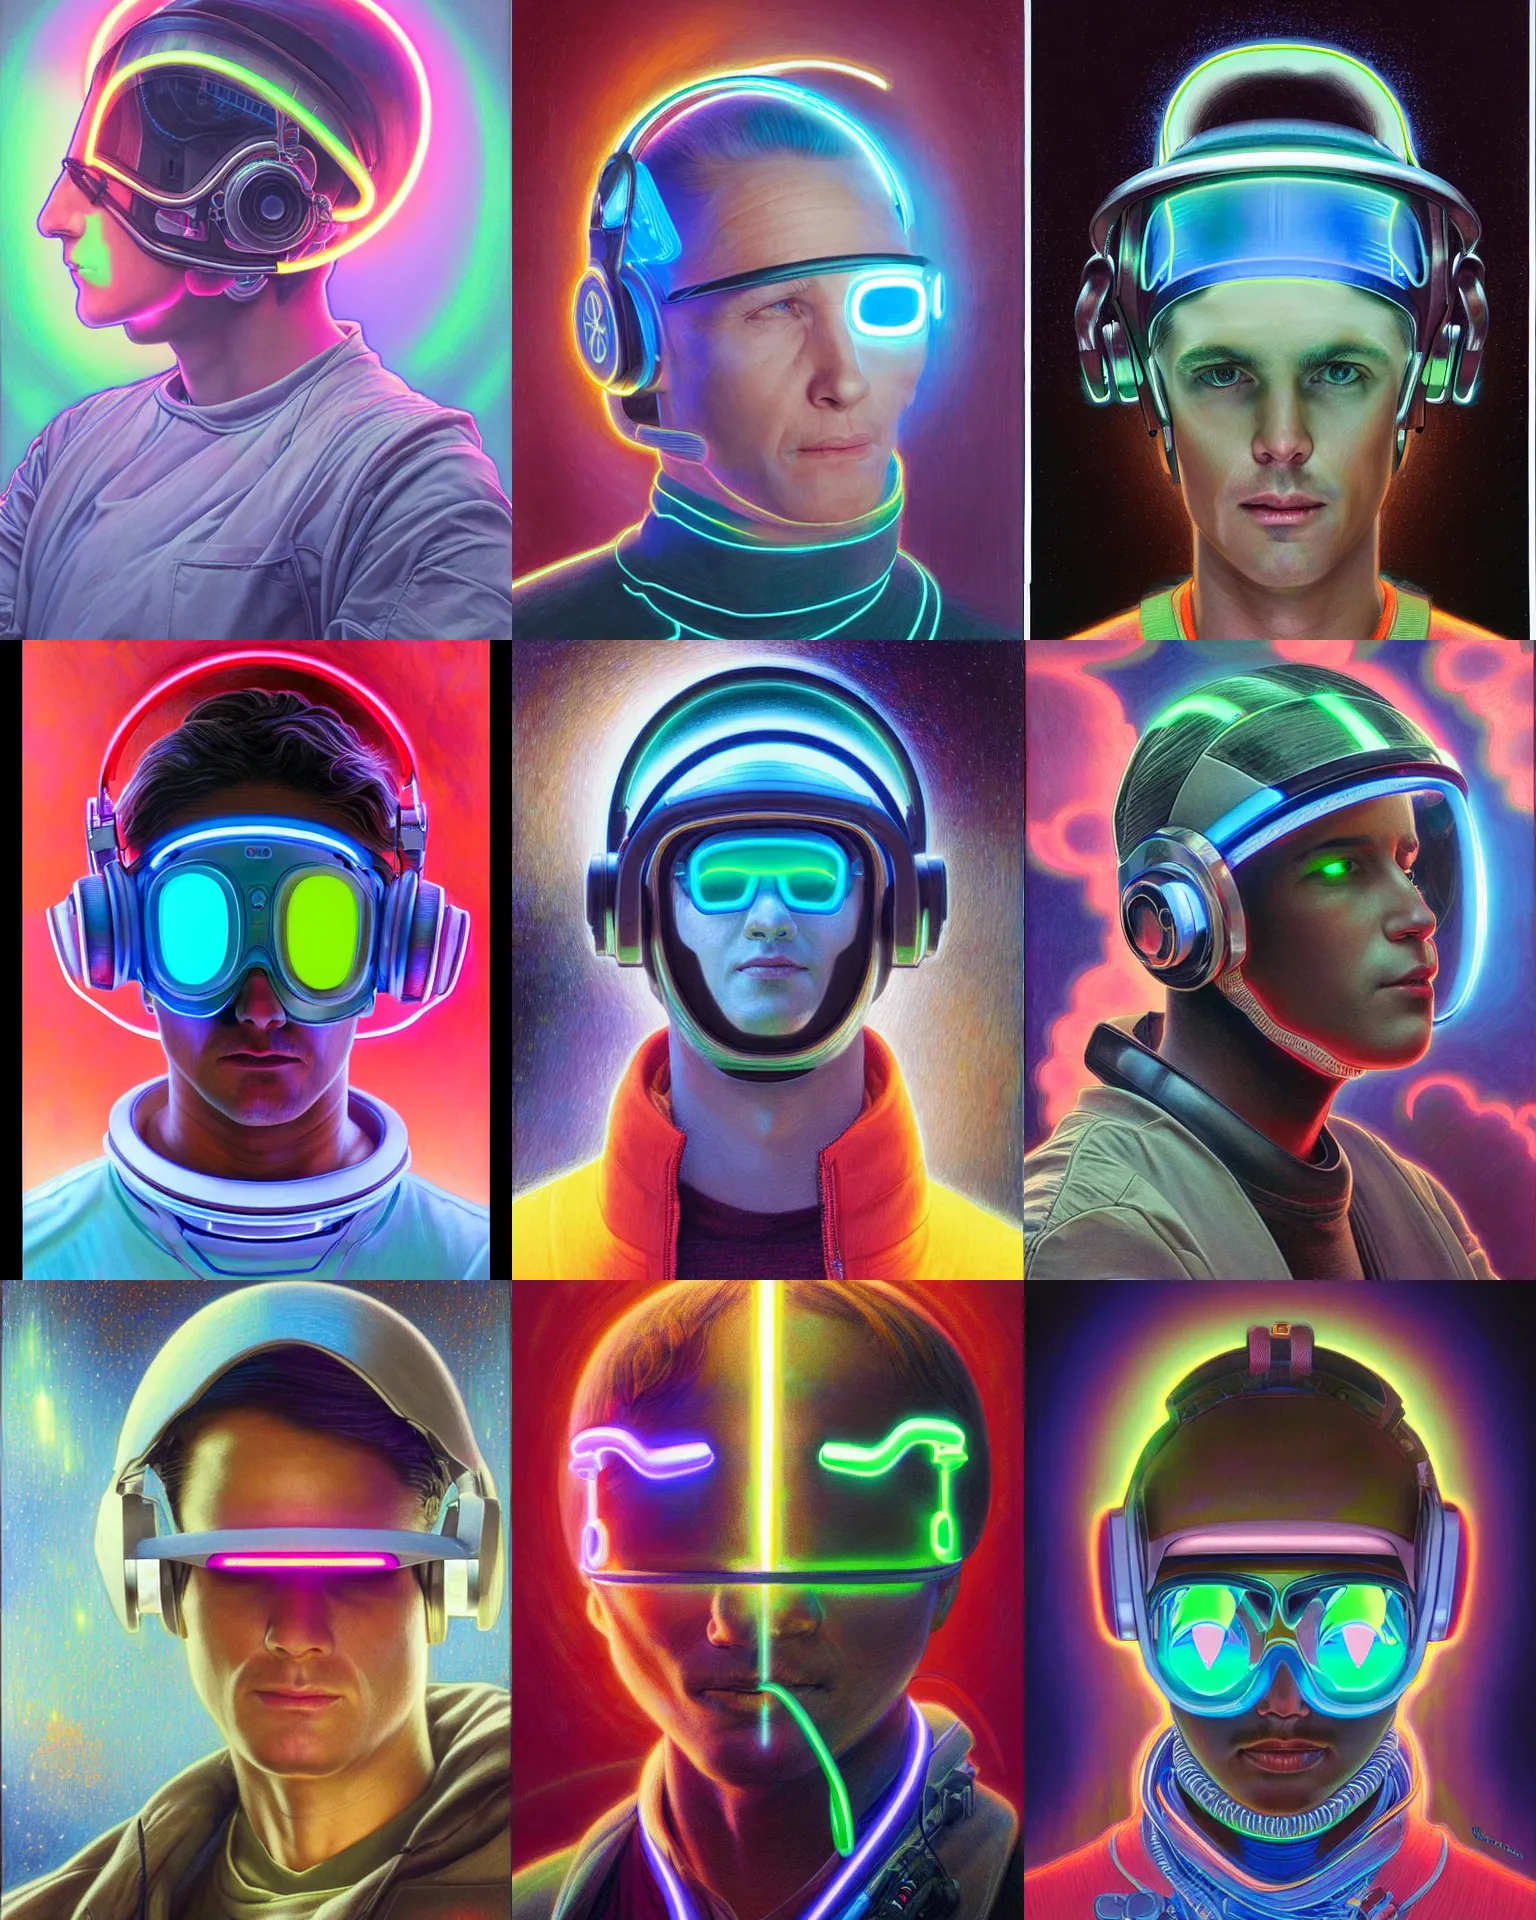 Prompt: future coder, glowing visor over eyes and sleek neon headphones headshot desaturated profile portrait colored pencil underdrawing painting by donato giancola, dean cornwall, rhads, tom whalen, alex grey, alphonse mucha, astronaut cyberpunk electric fashion photography